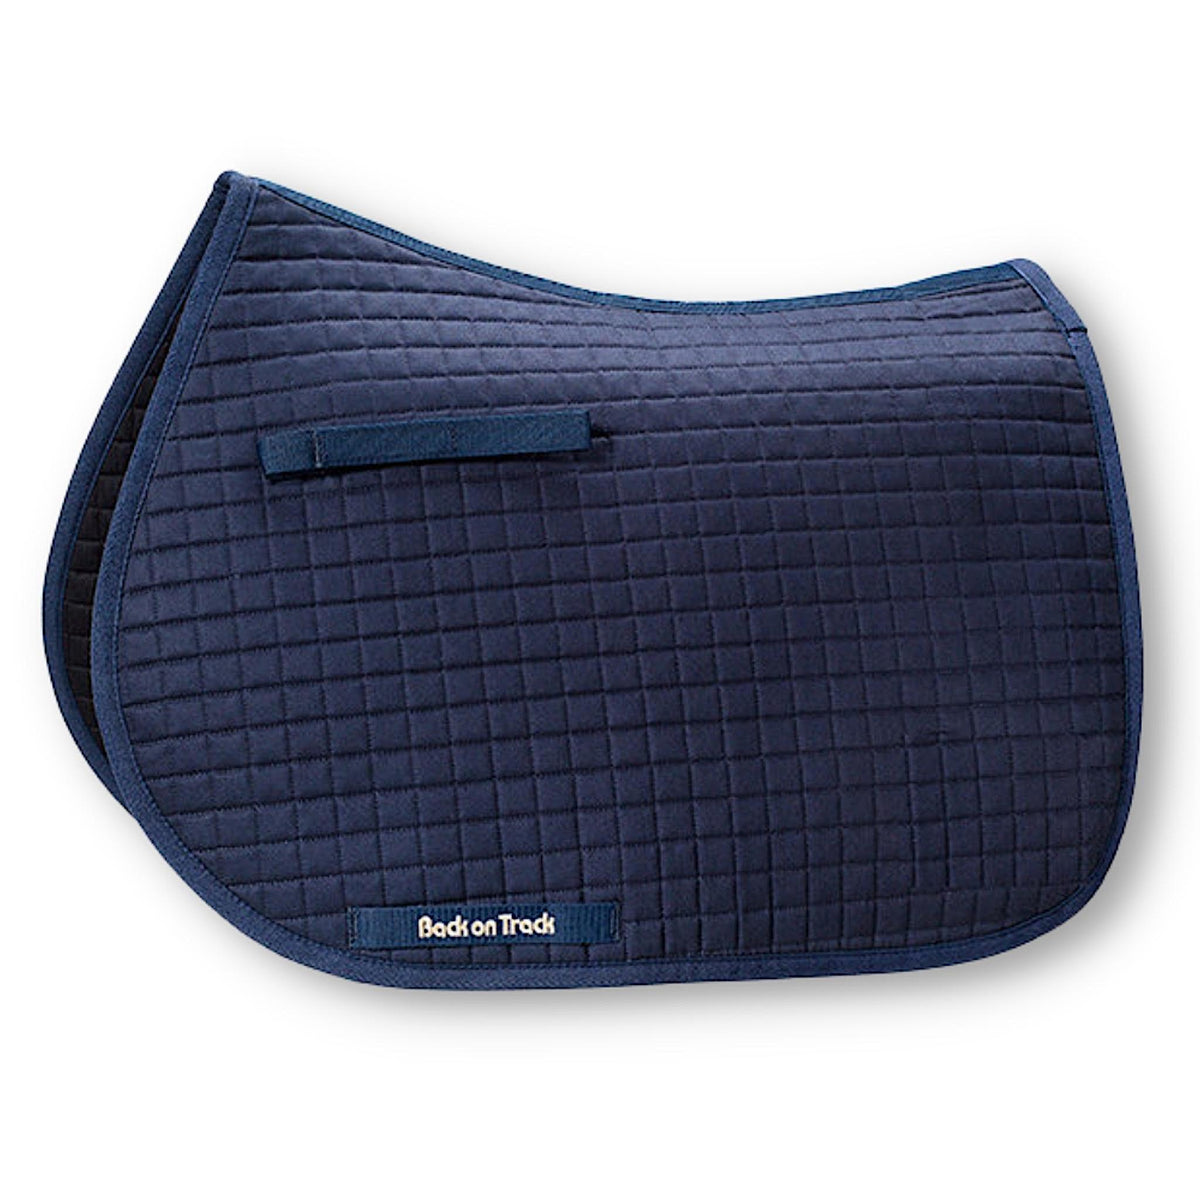 Navy saddle pad with keepers in all purpose shape.